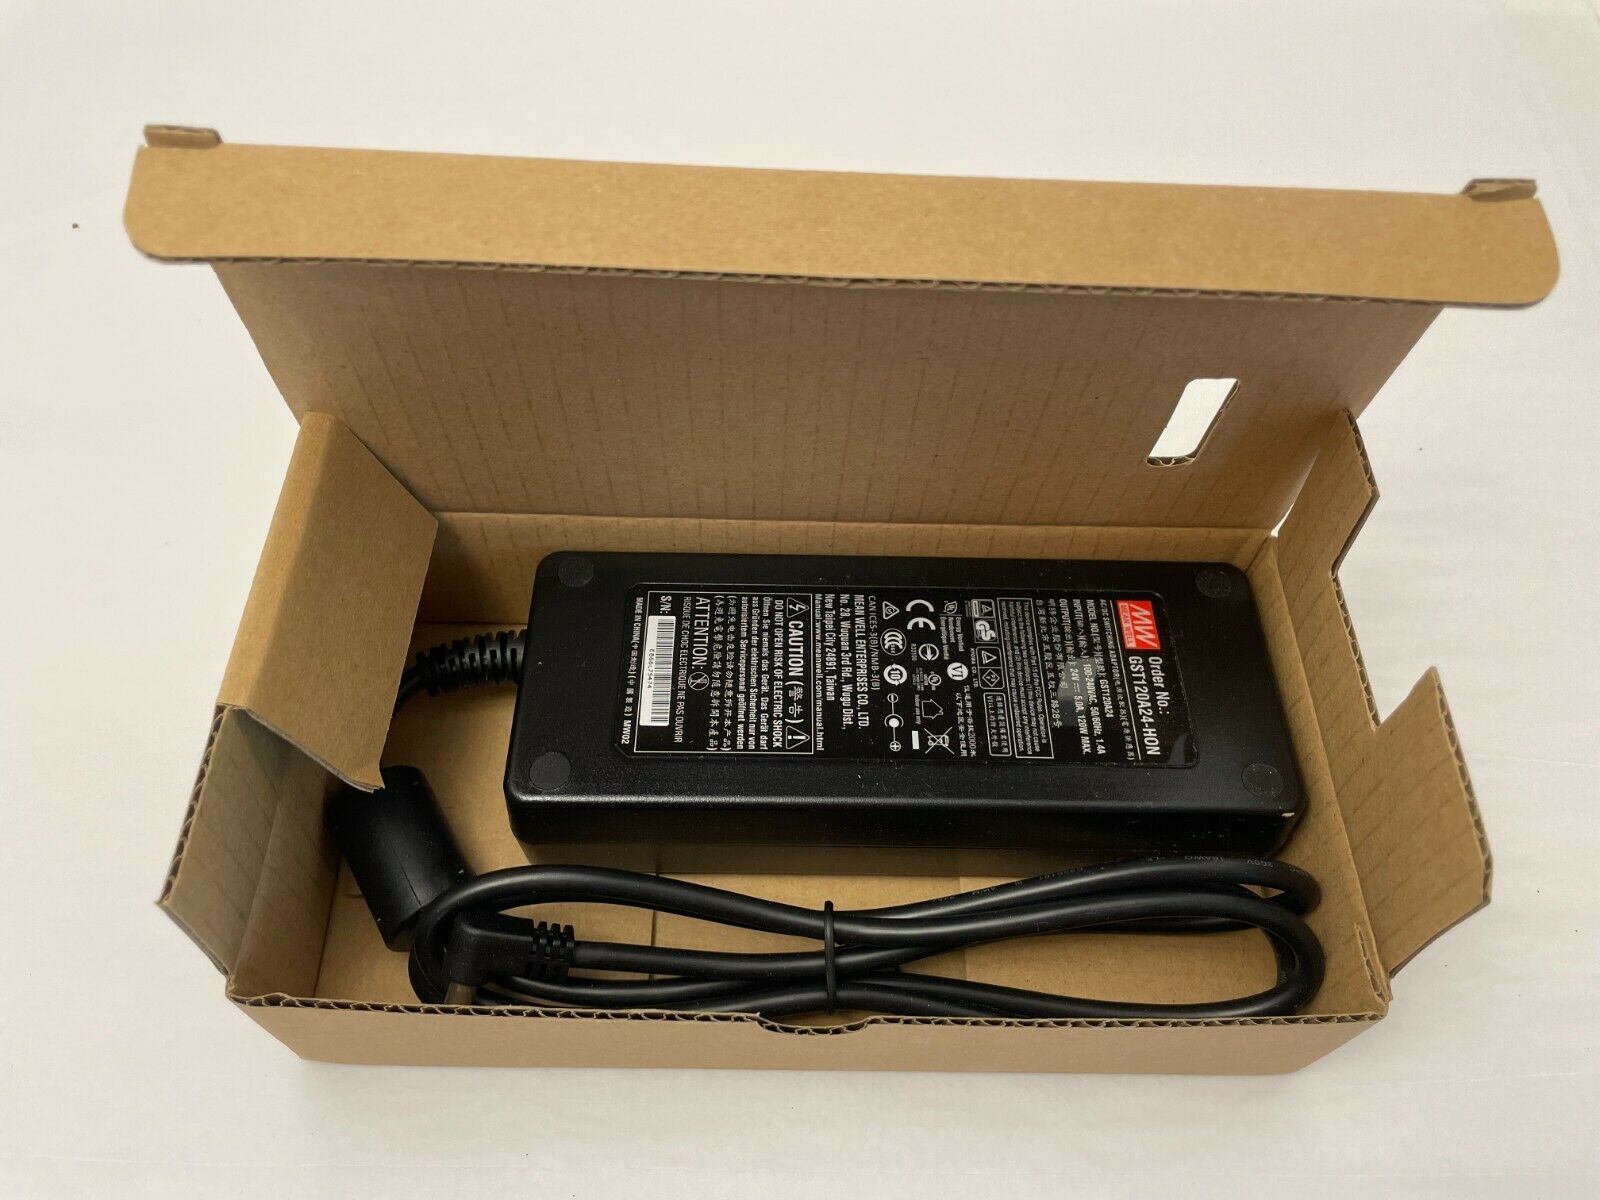 MEAN WELL GST120A24-HON Power Supply AC/DC, L6, 24V, 120W, 5 Amp New in Box Country/Region of Man - Click Image to Close